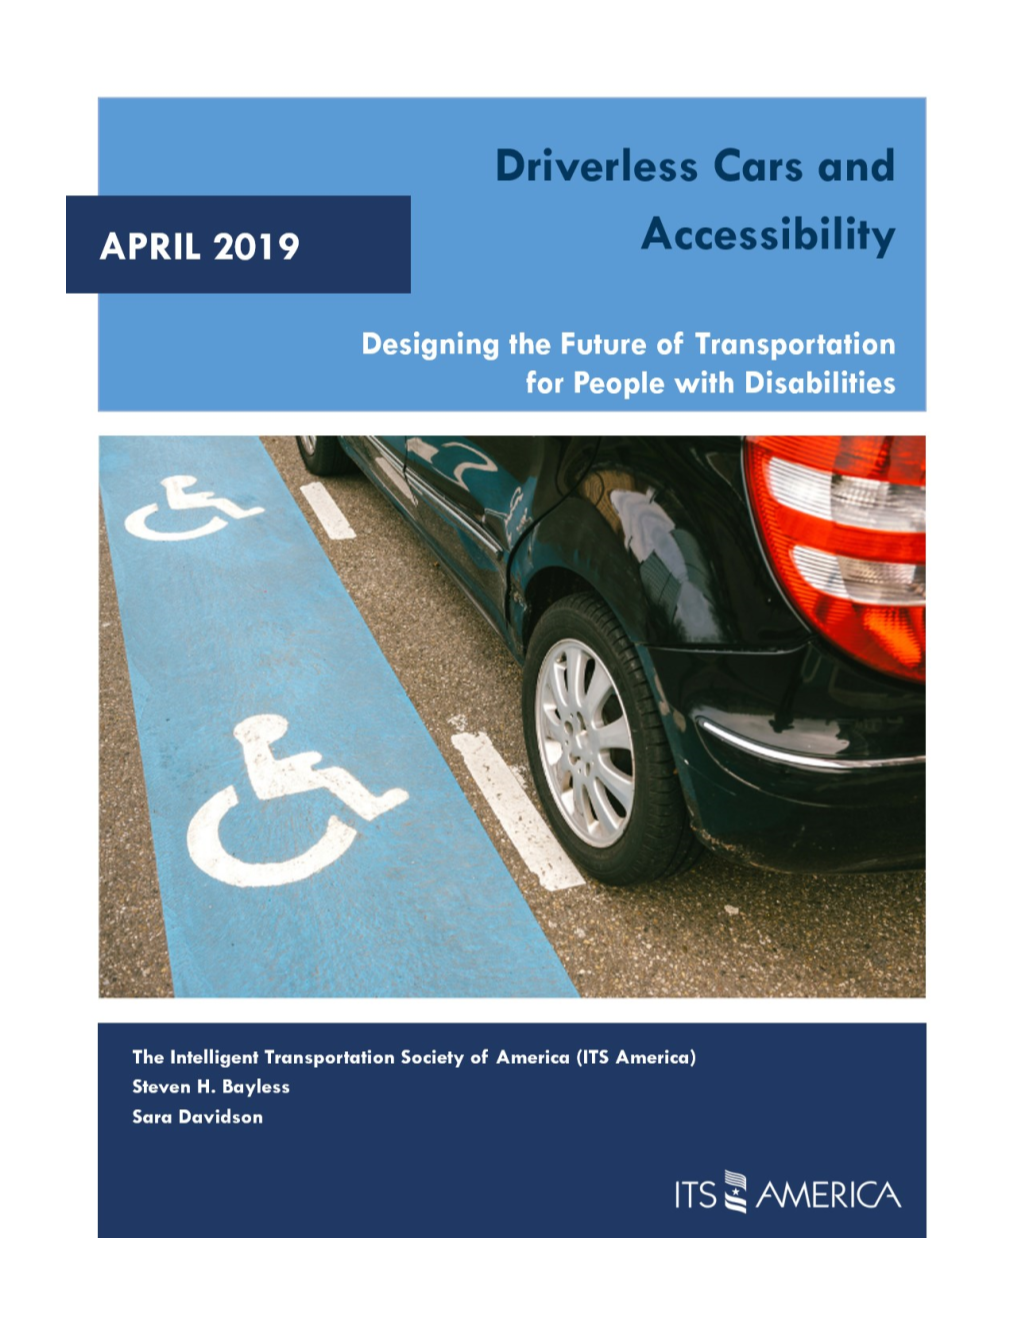 Driverless Cars and Accessibility ITS America |April 2019